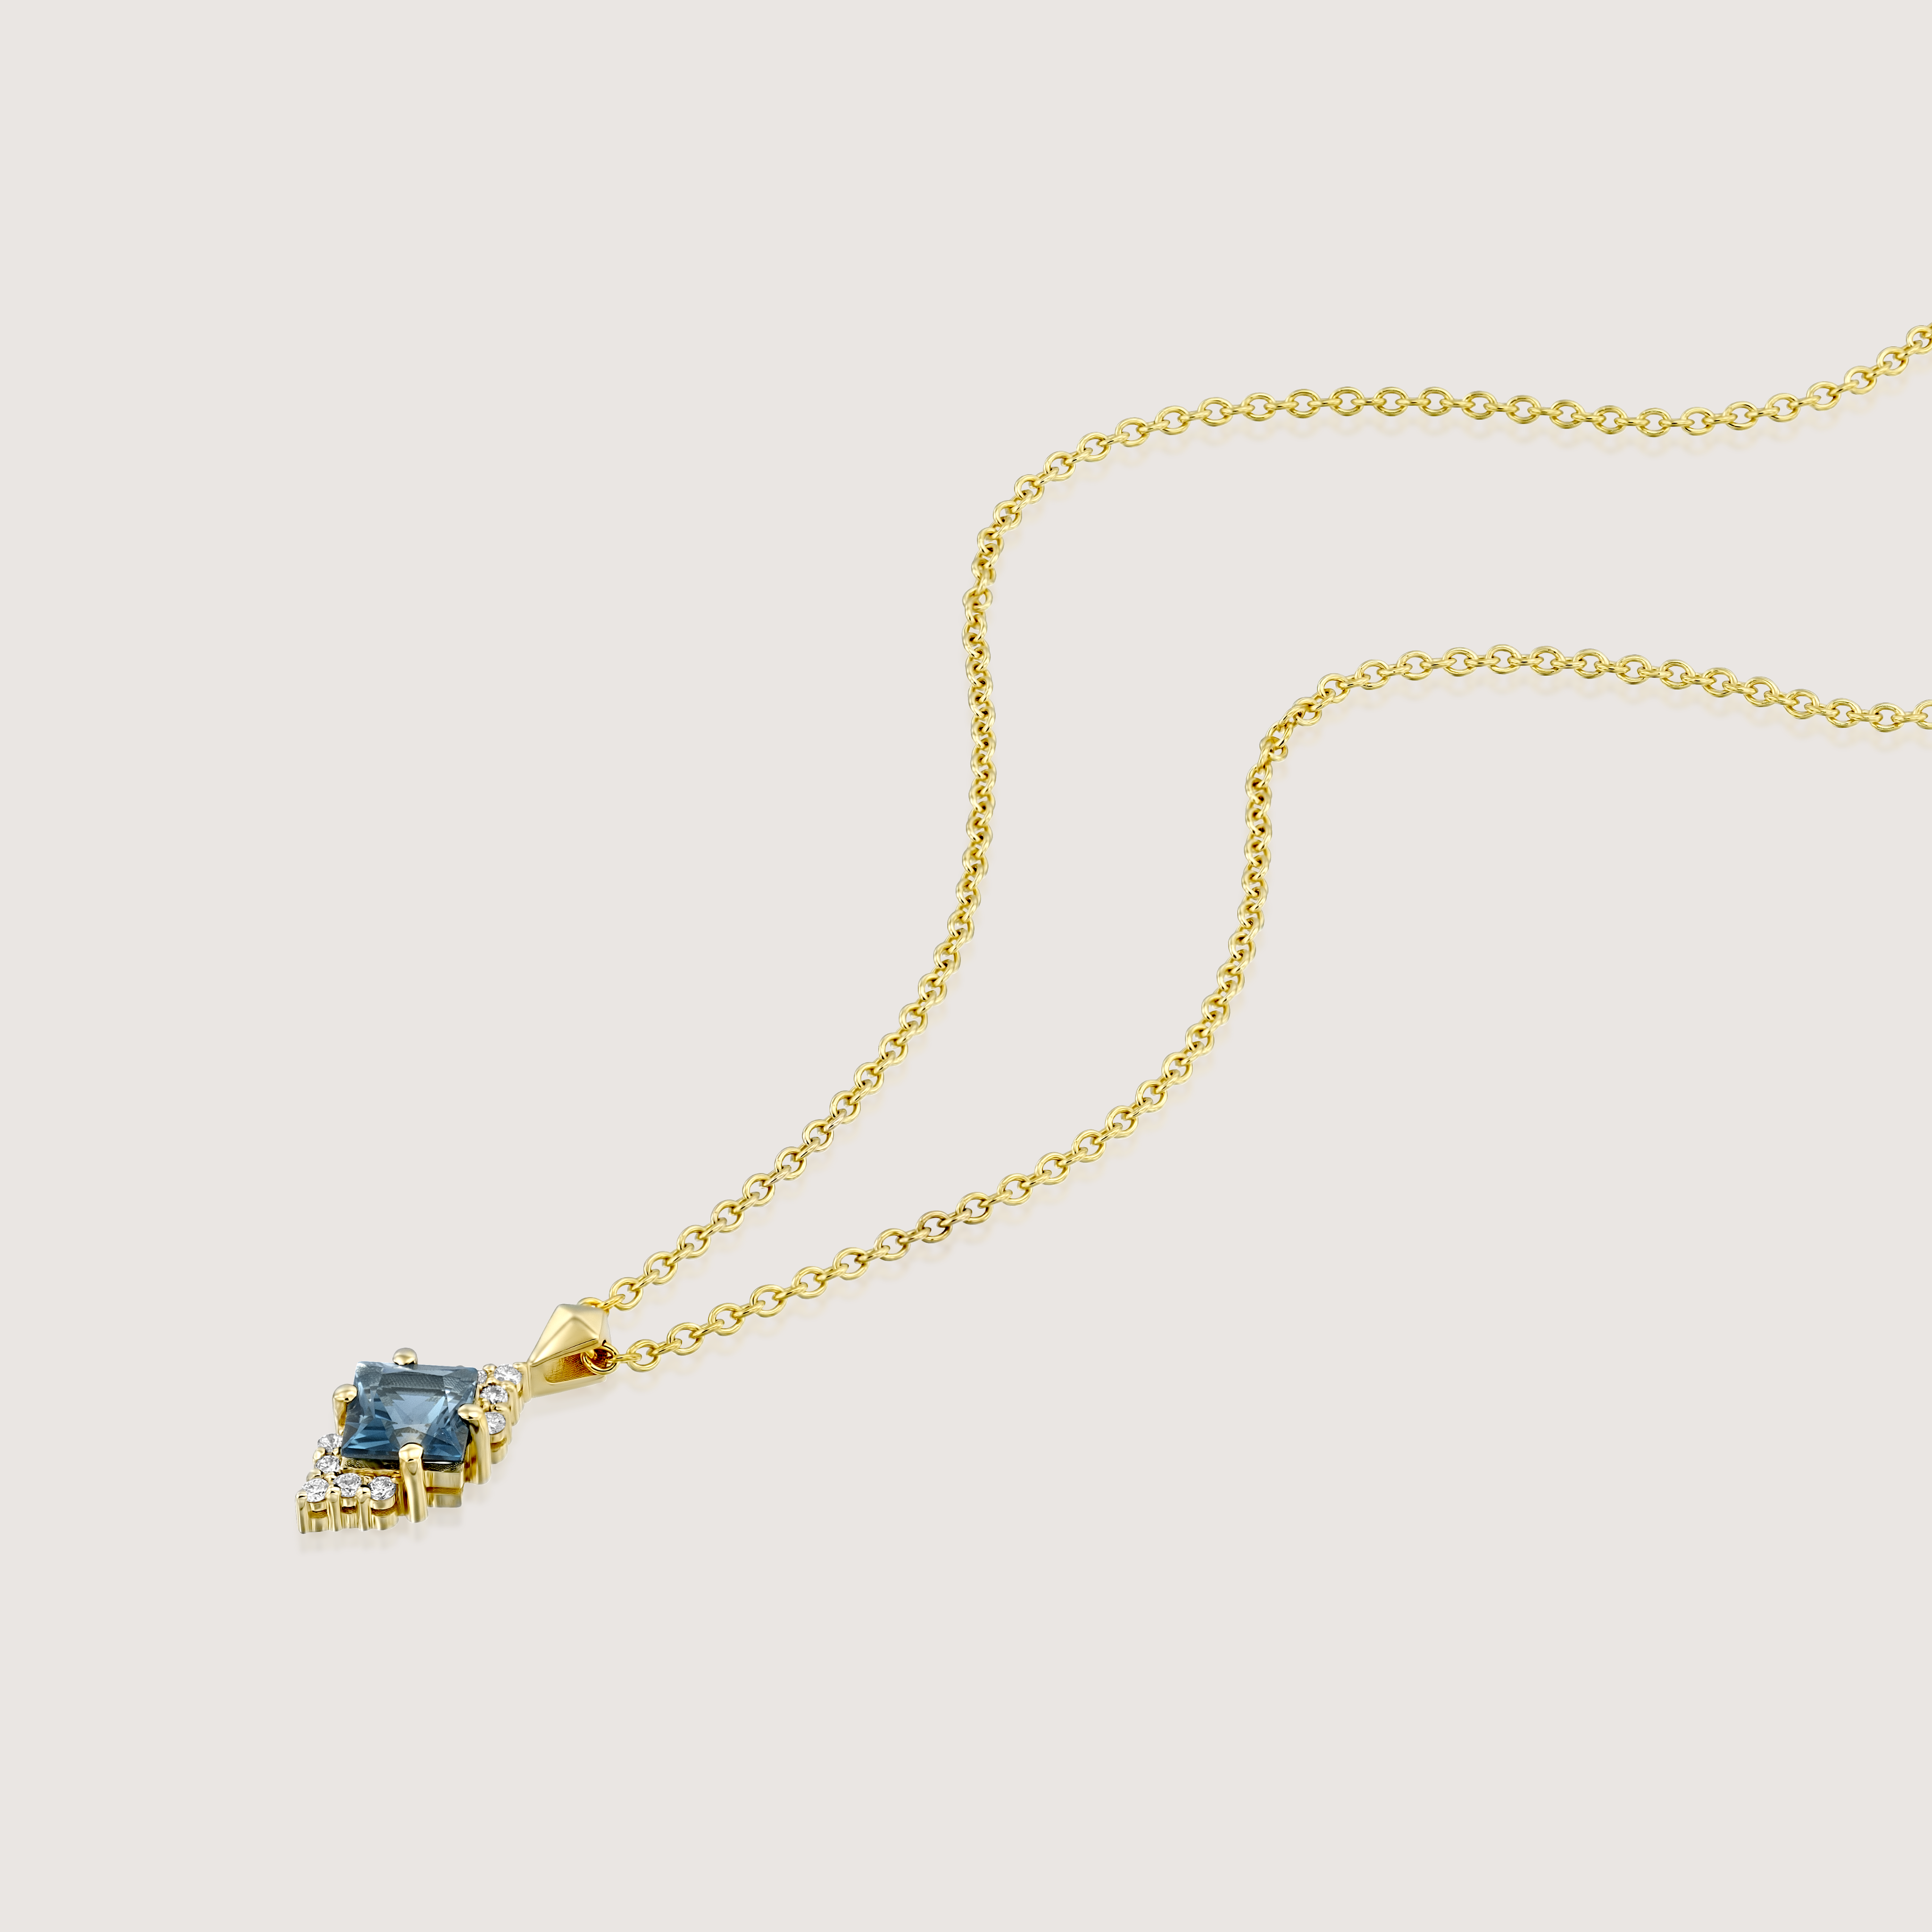 Juliette Necklace With Diamonds and Blue Topaz